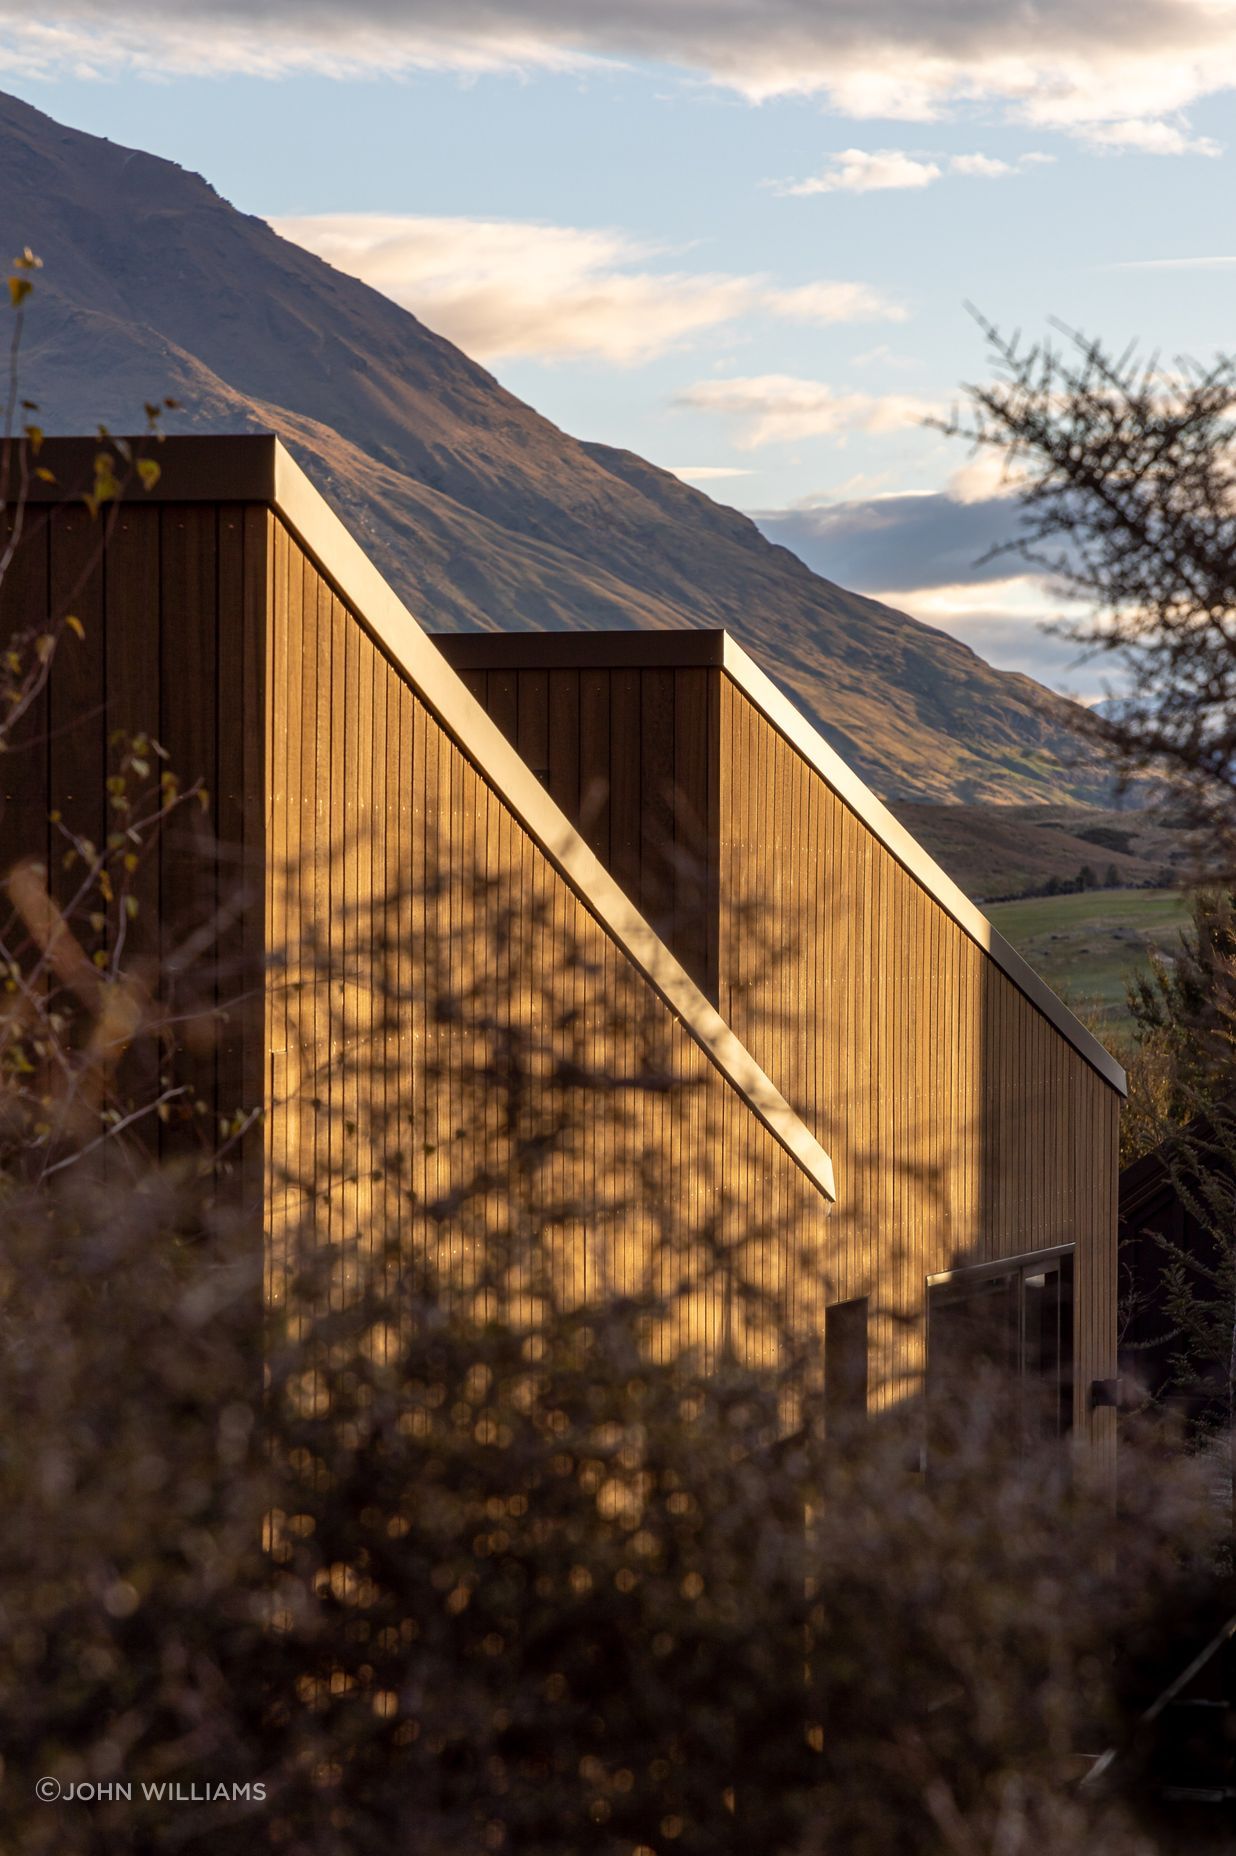 Single-pitch roof forms face the adjacent mountain range